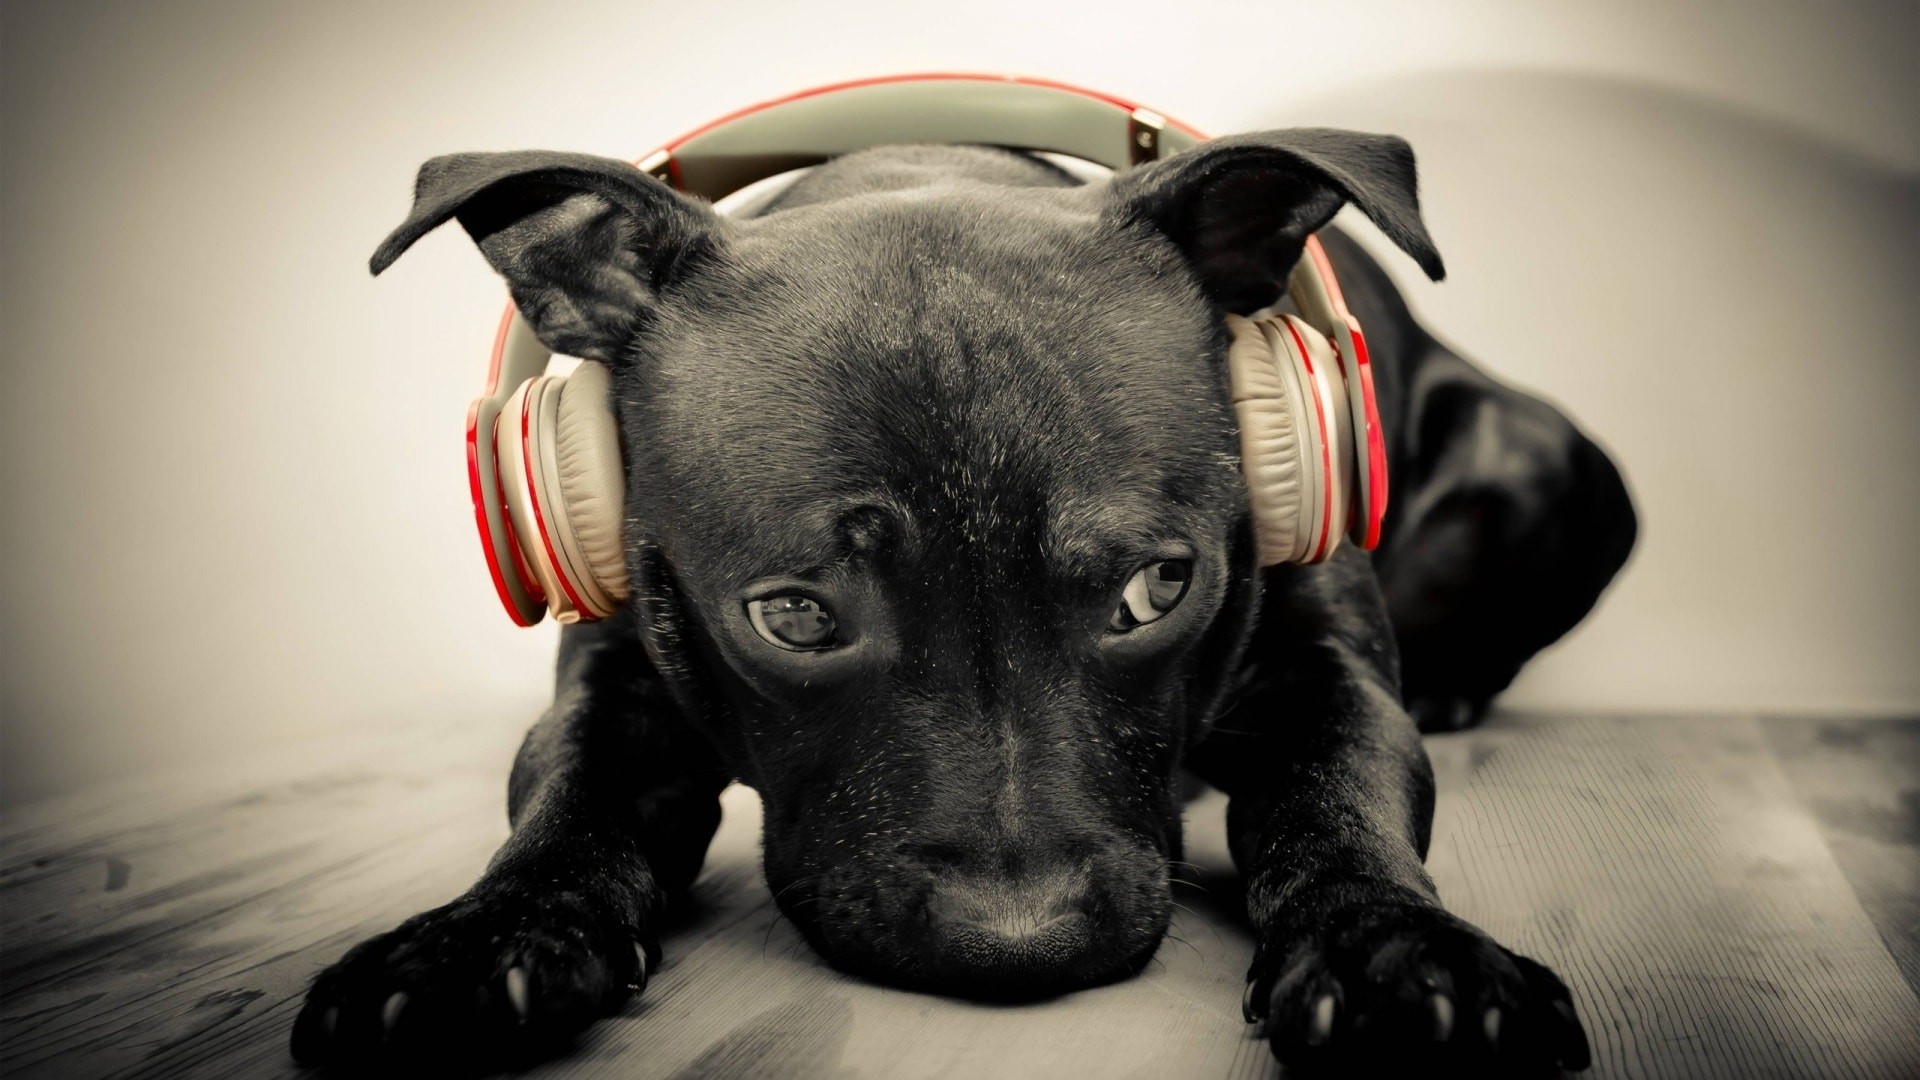 1920x1080 Wallpaper Cute dog headphones - Image #1490 - Licence: Free for Personal  Use -